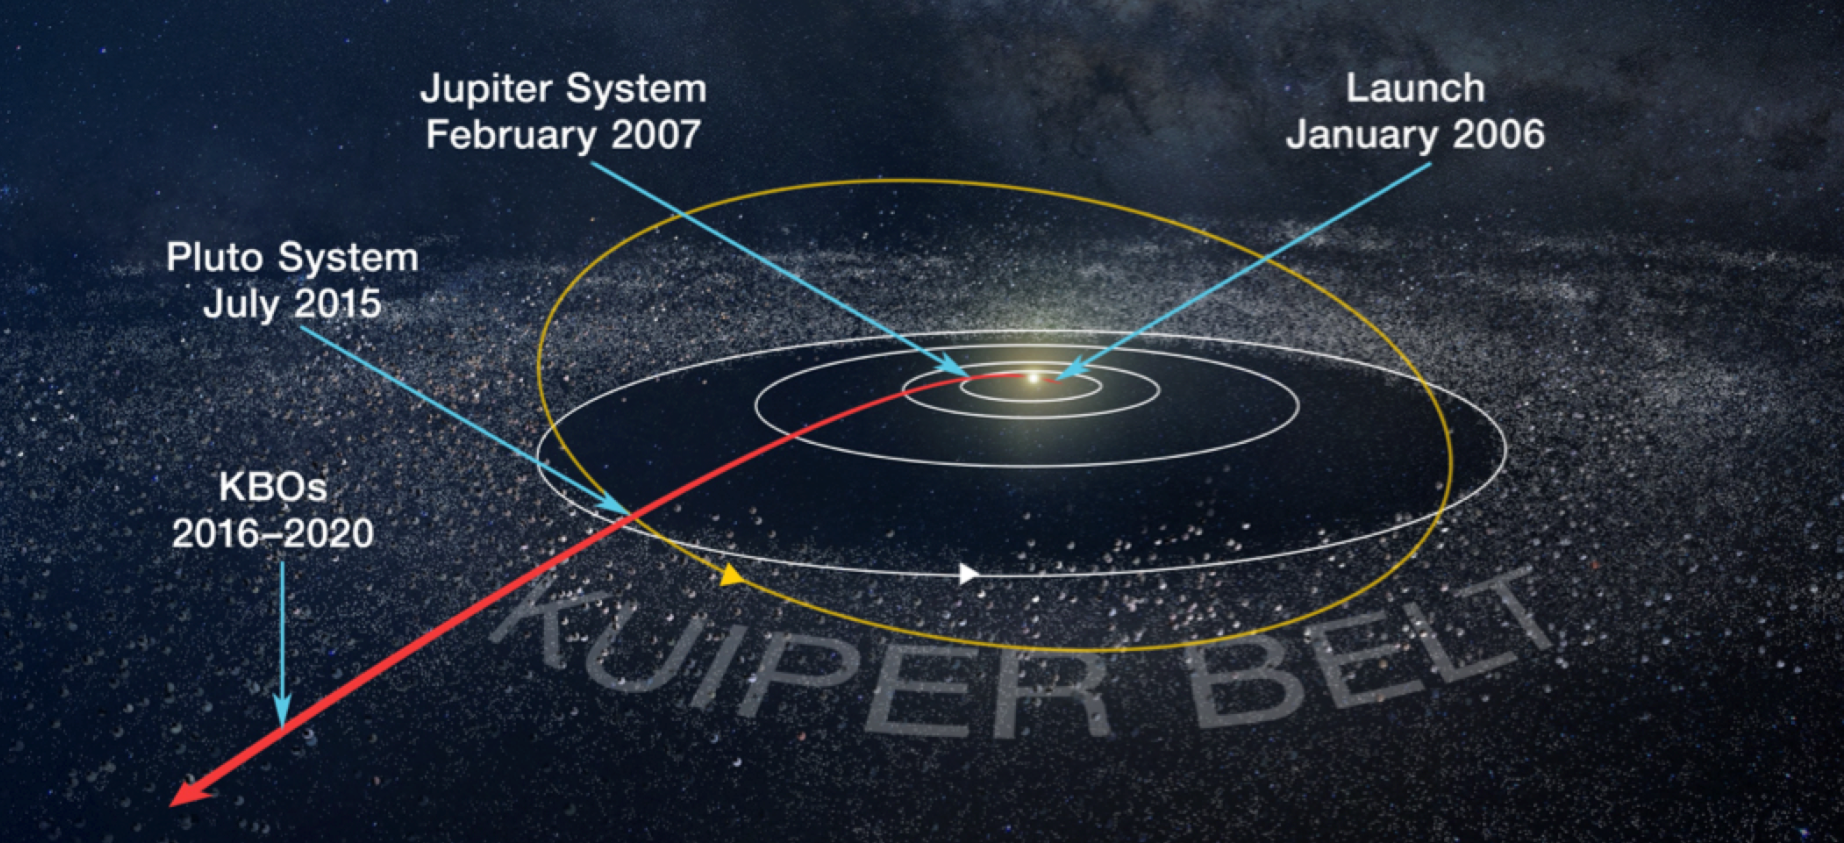 A diagram of the New Horizons spacecraft’s journey through the Outer Solar System